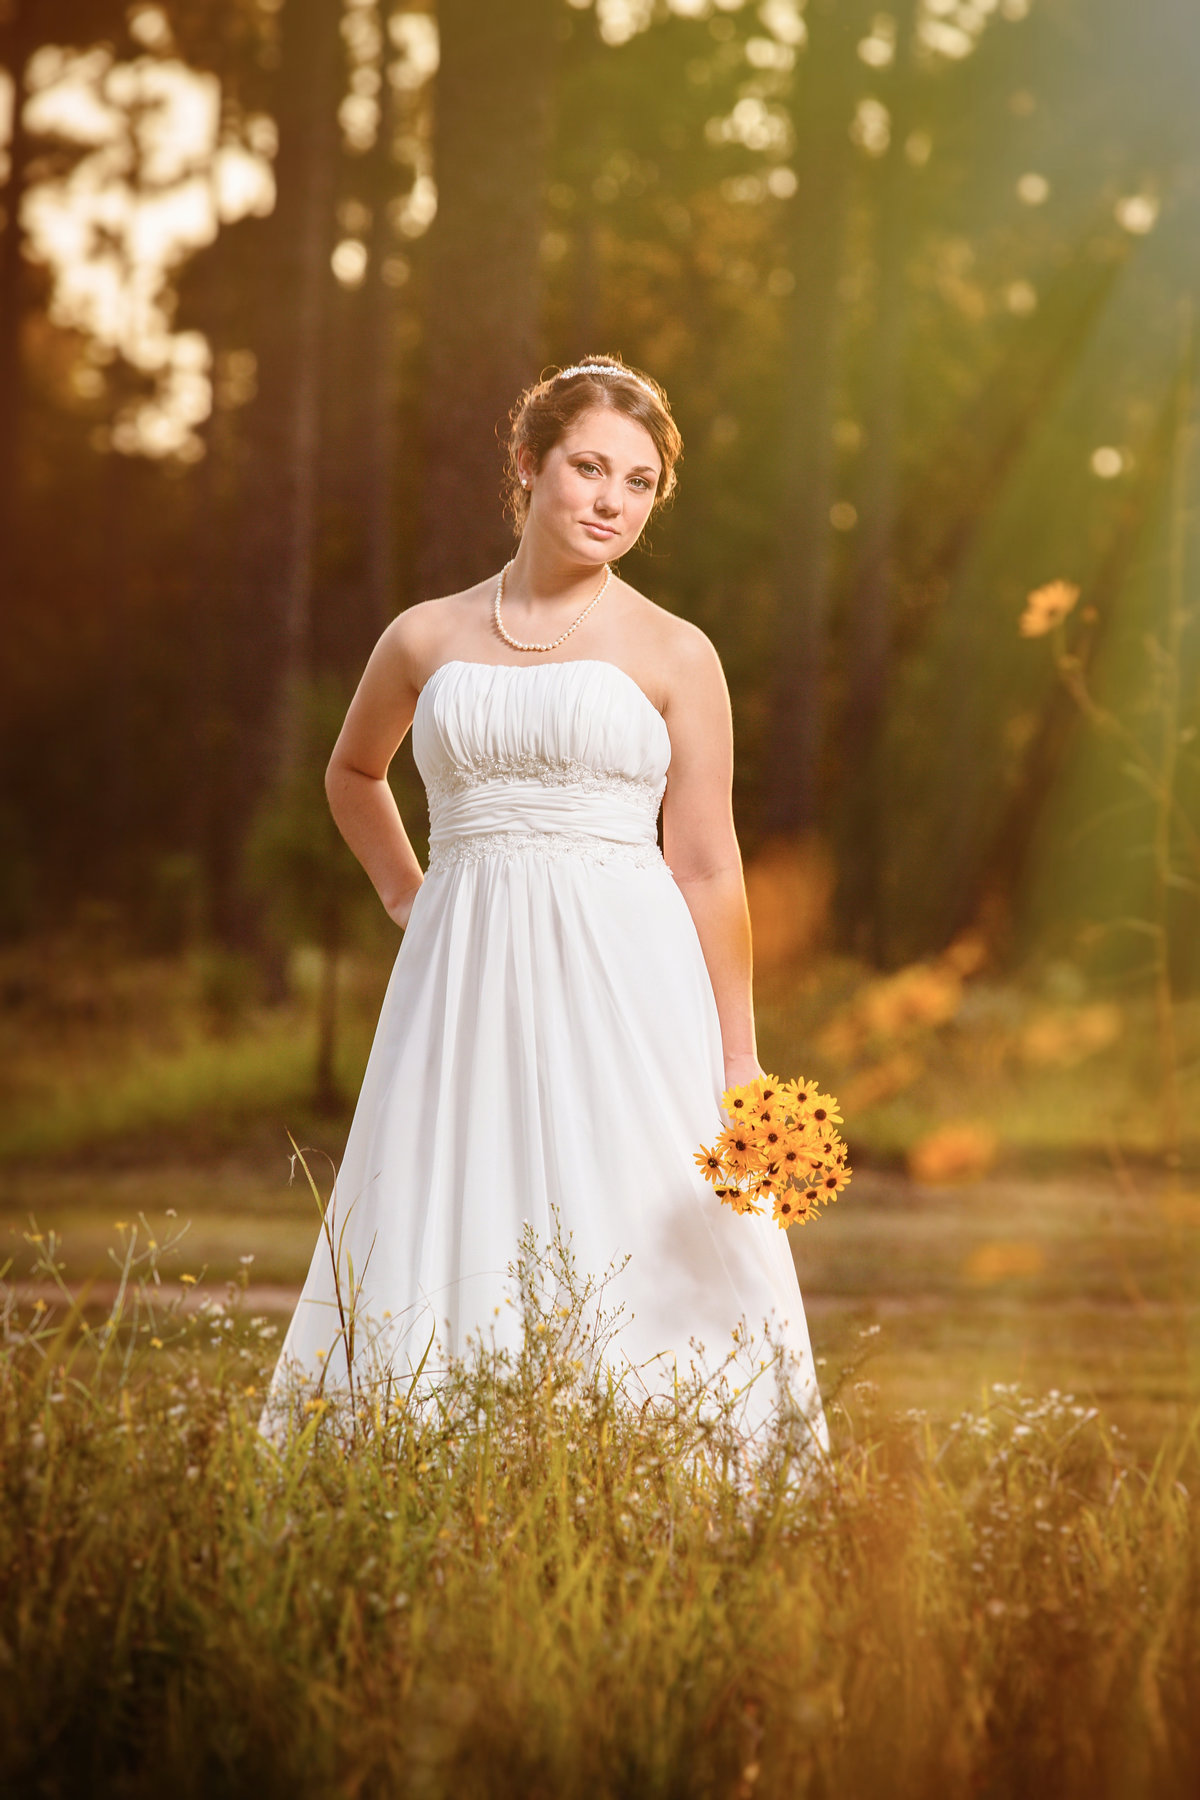 Bridal portrait in.a grassy field at Blakeley State Park in Spanish Fort, Alabama.